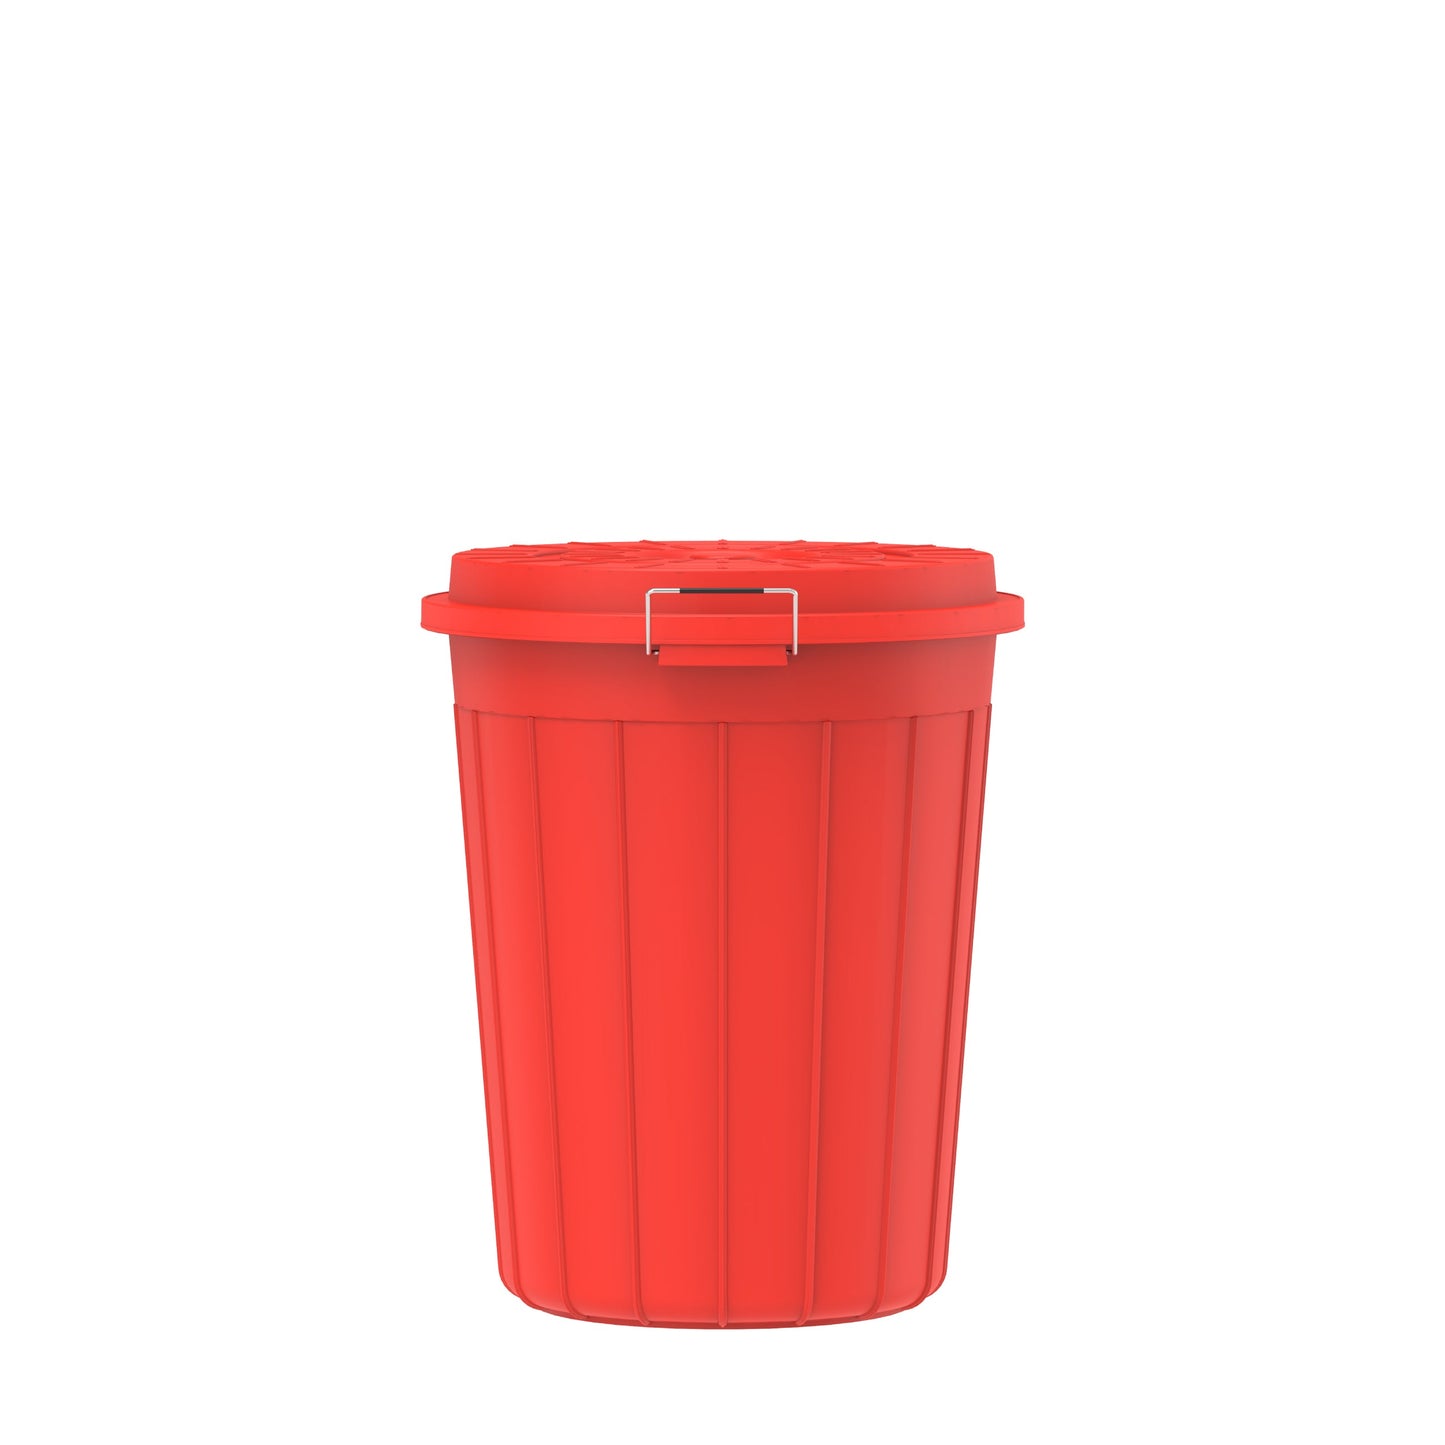 45L Round Plastic Drums with Lid - Cosmoplast Bahrain